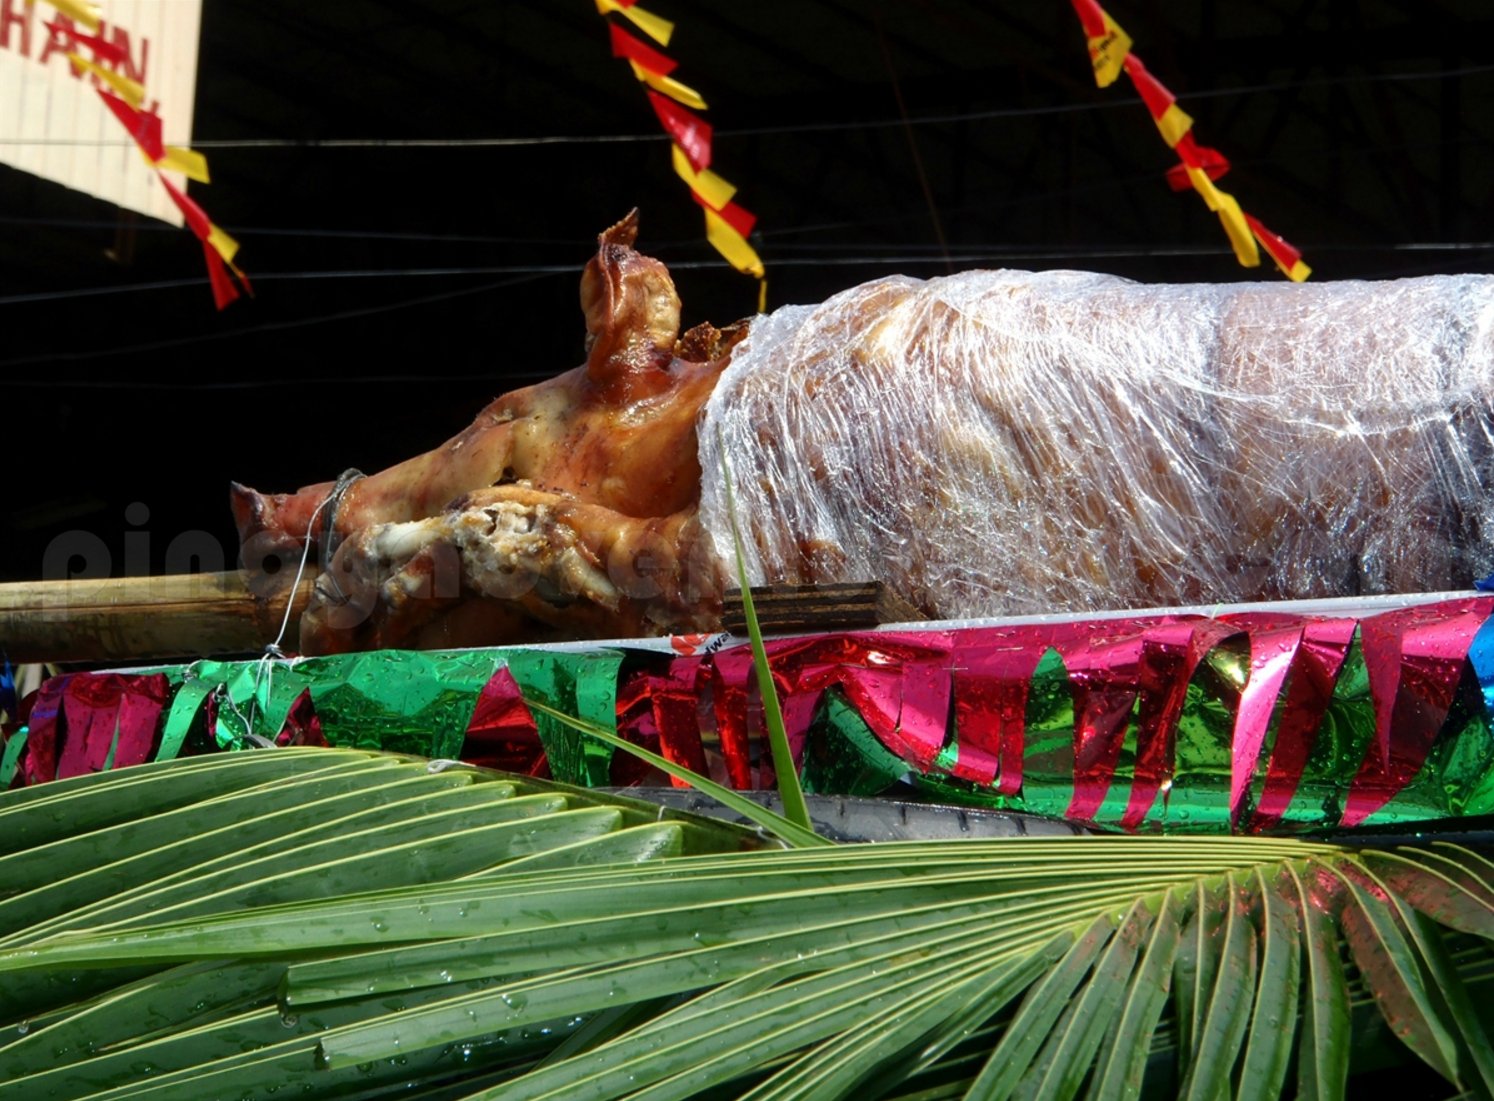 Bizarre Way of Celebrating the Feast of Saint John in the Philippines